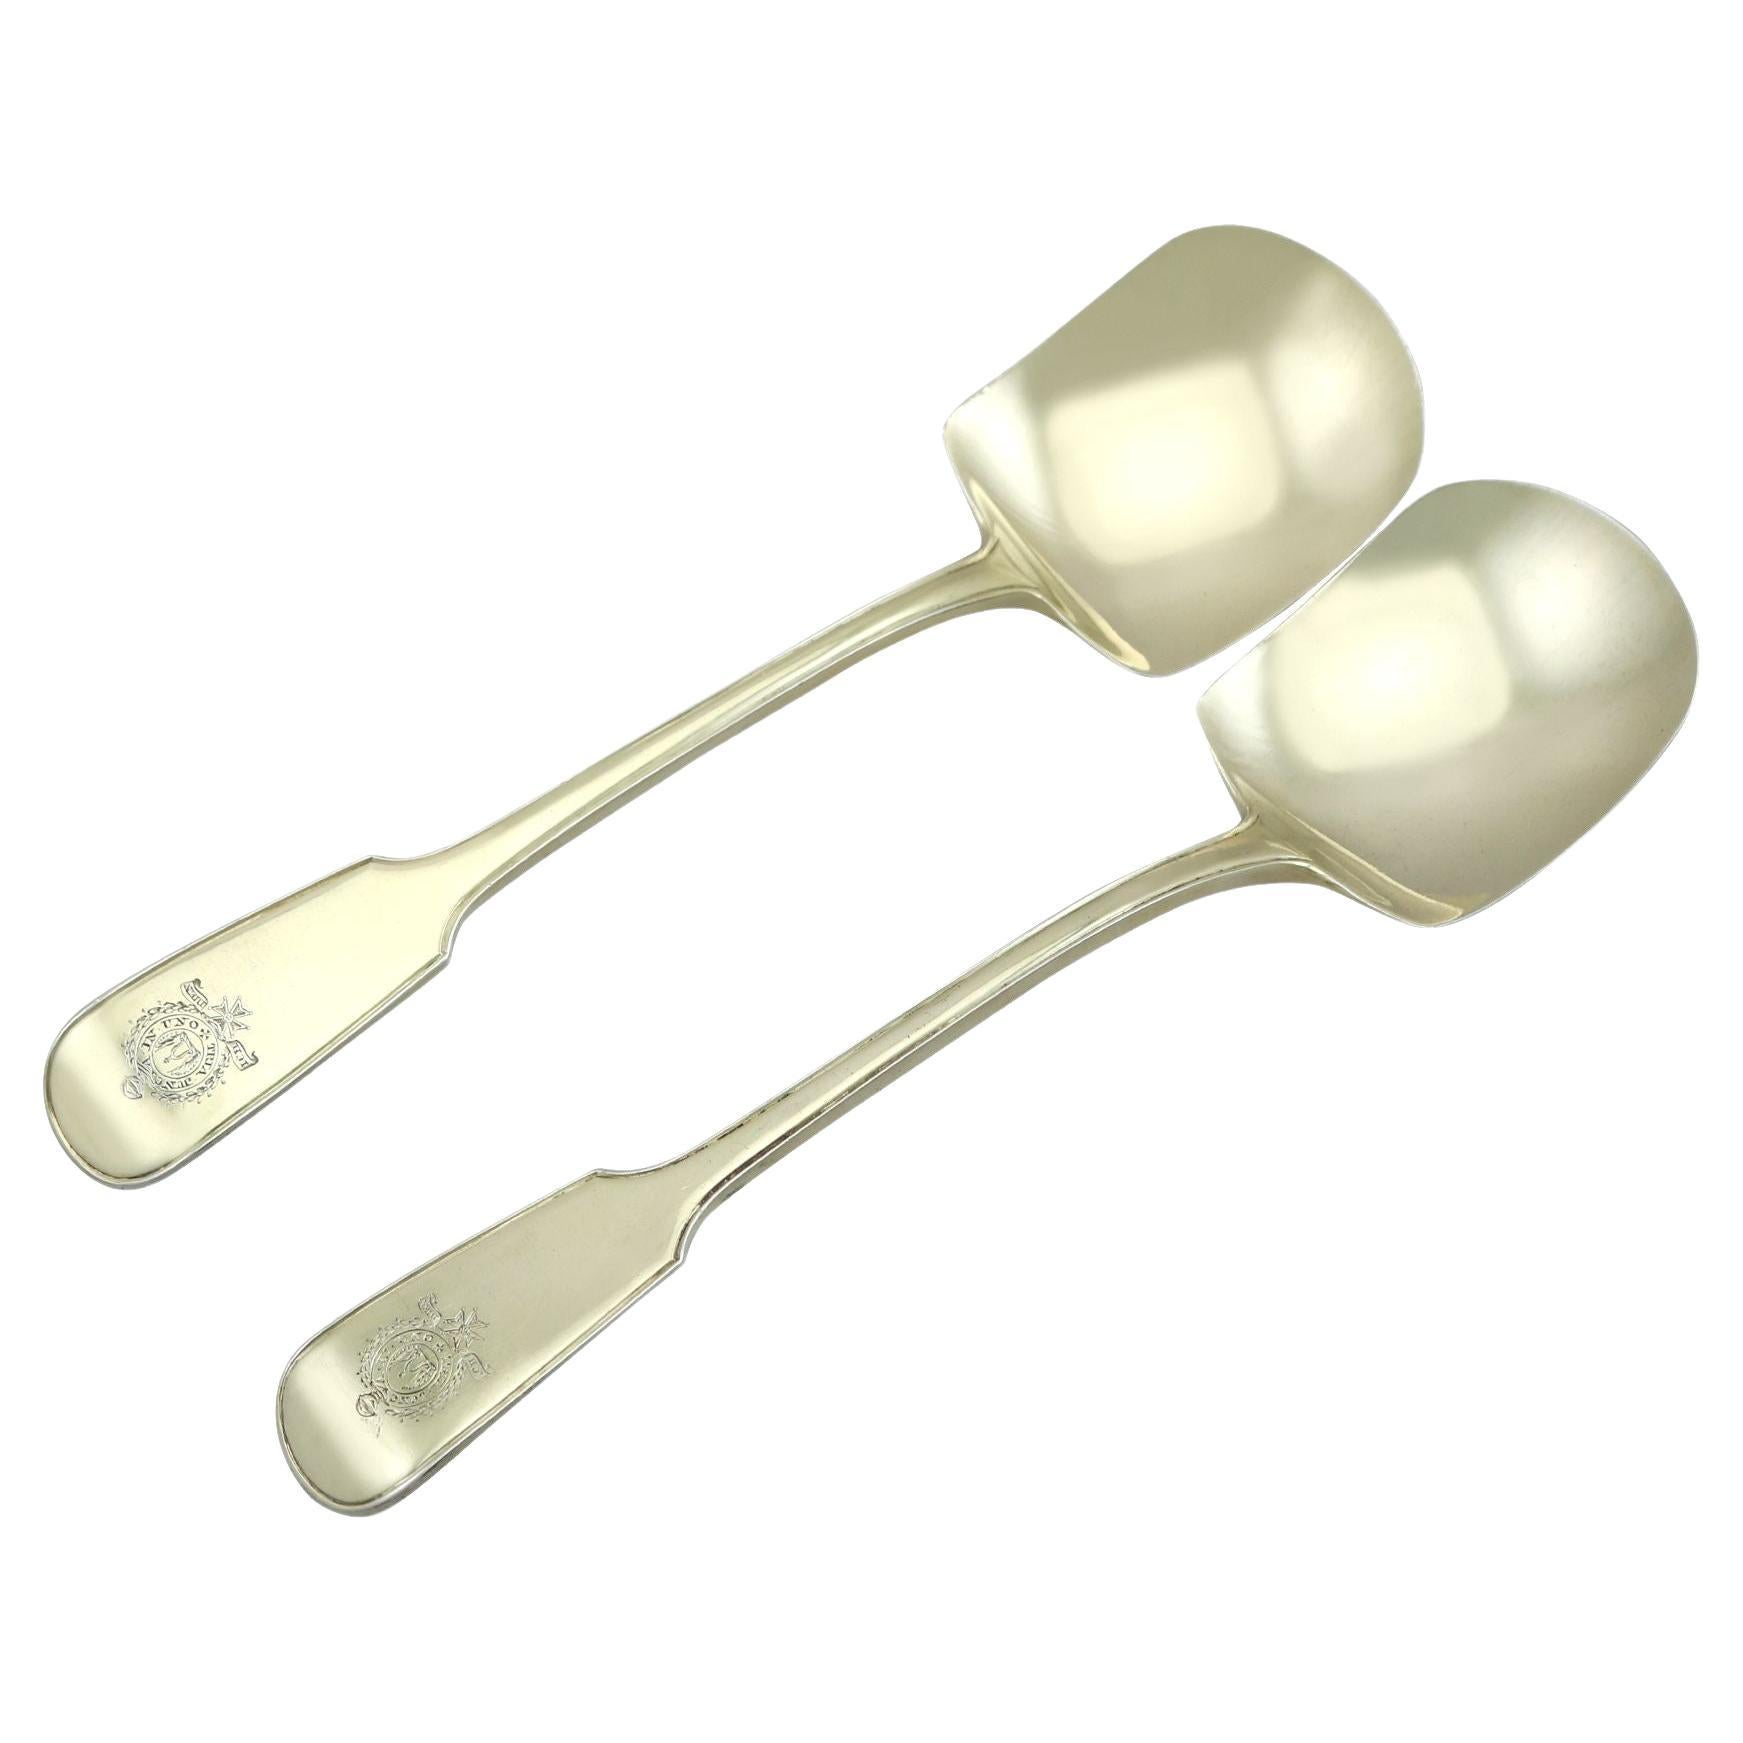 Antique Sterling Silver Gilt Fiddle Thread and Drop Ice Cream Servers For Sale